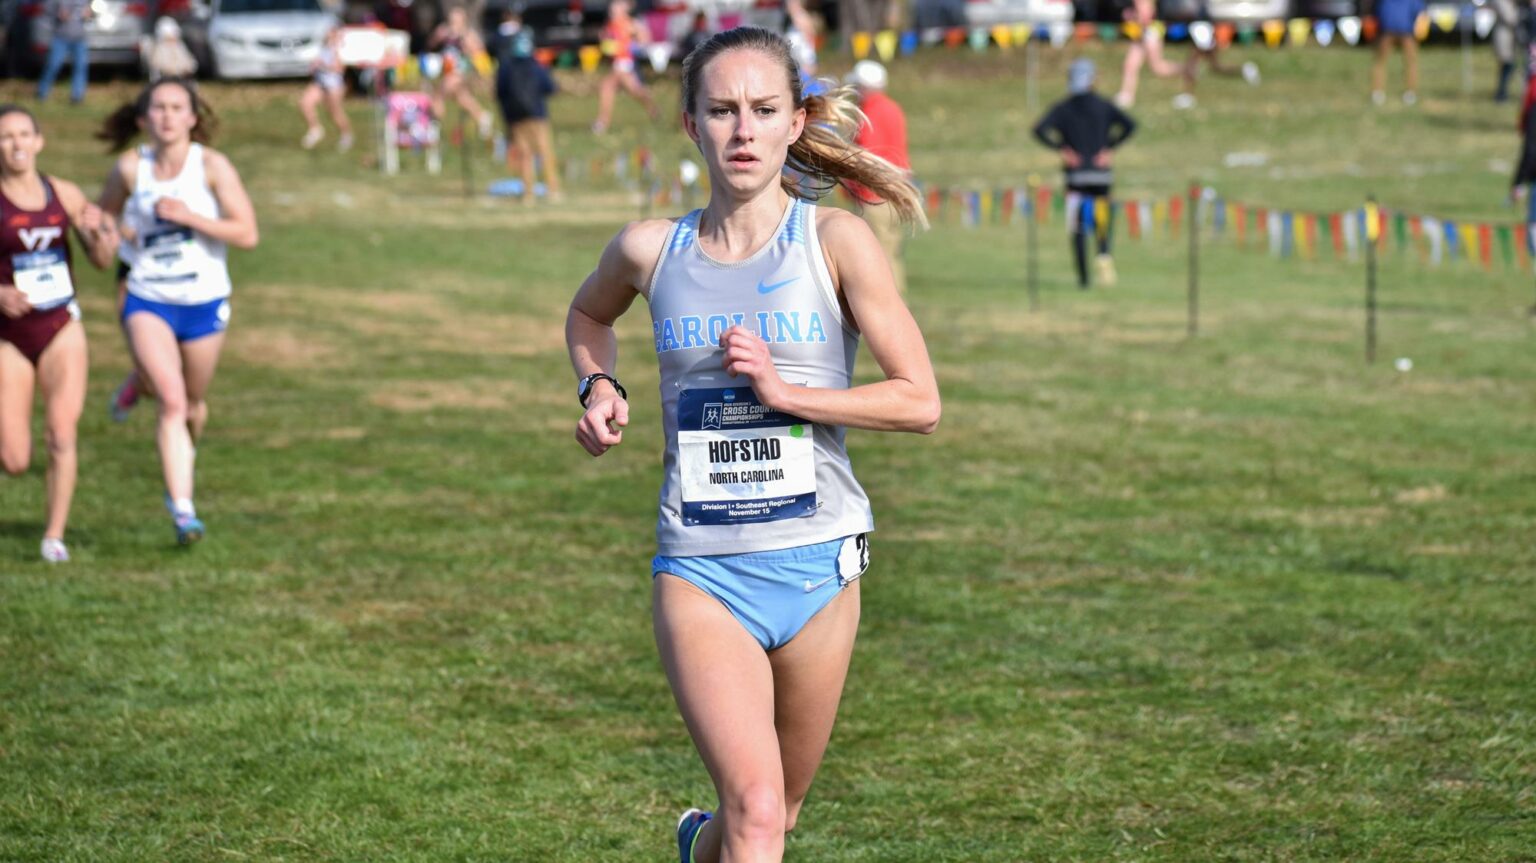 UNC Women's Cross Country Places Fifth Among Loaded Field at FSU XC